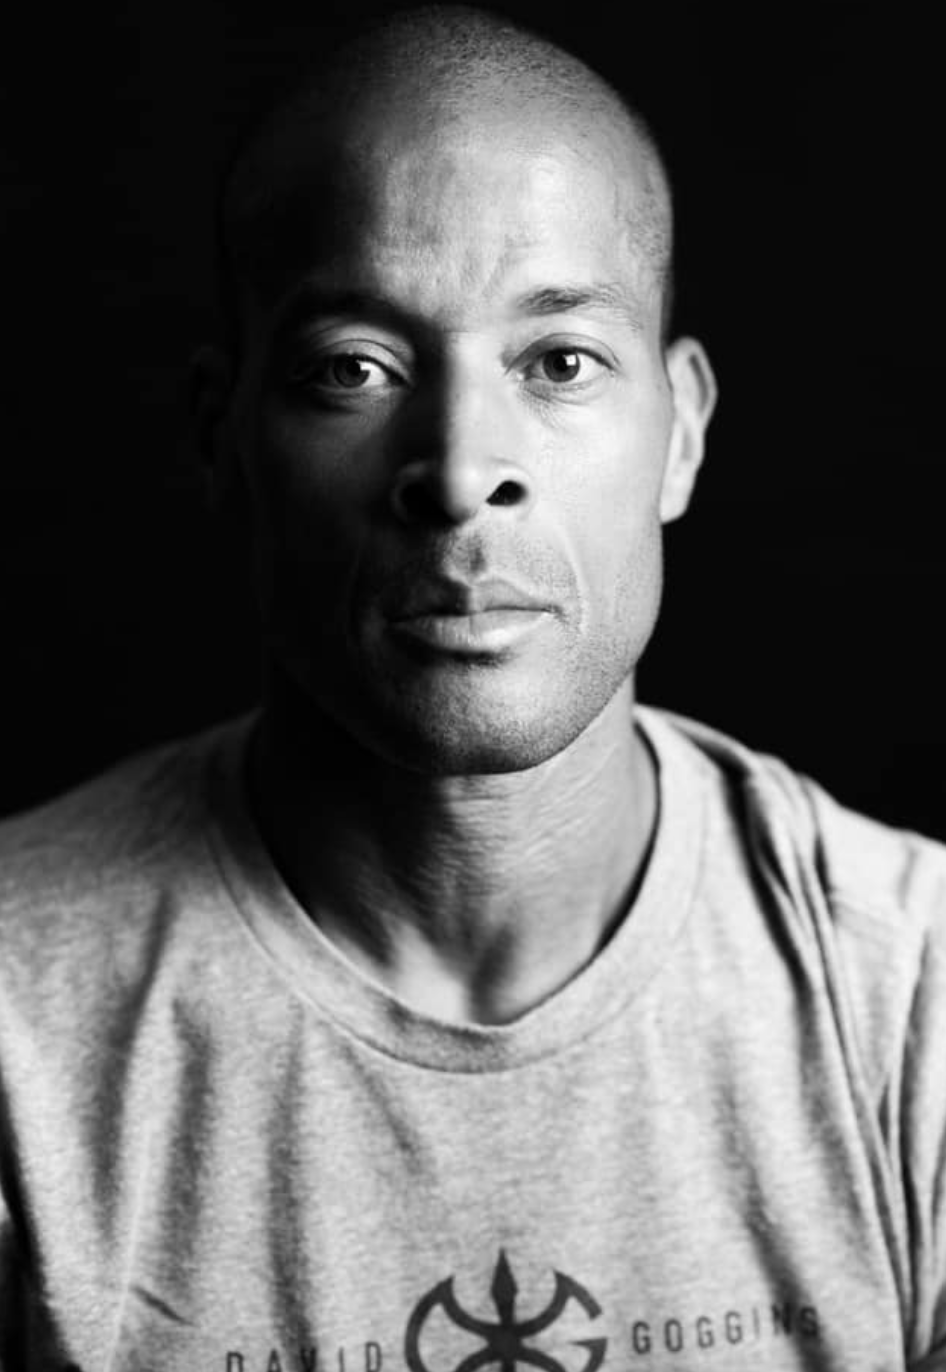 Beyond the “All Stick, No Carrot”: David Goggins Unveils His Inner Fire